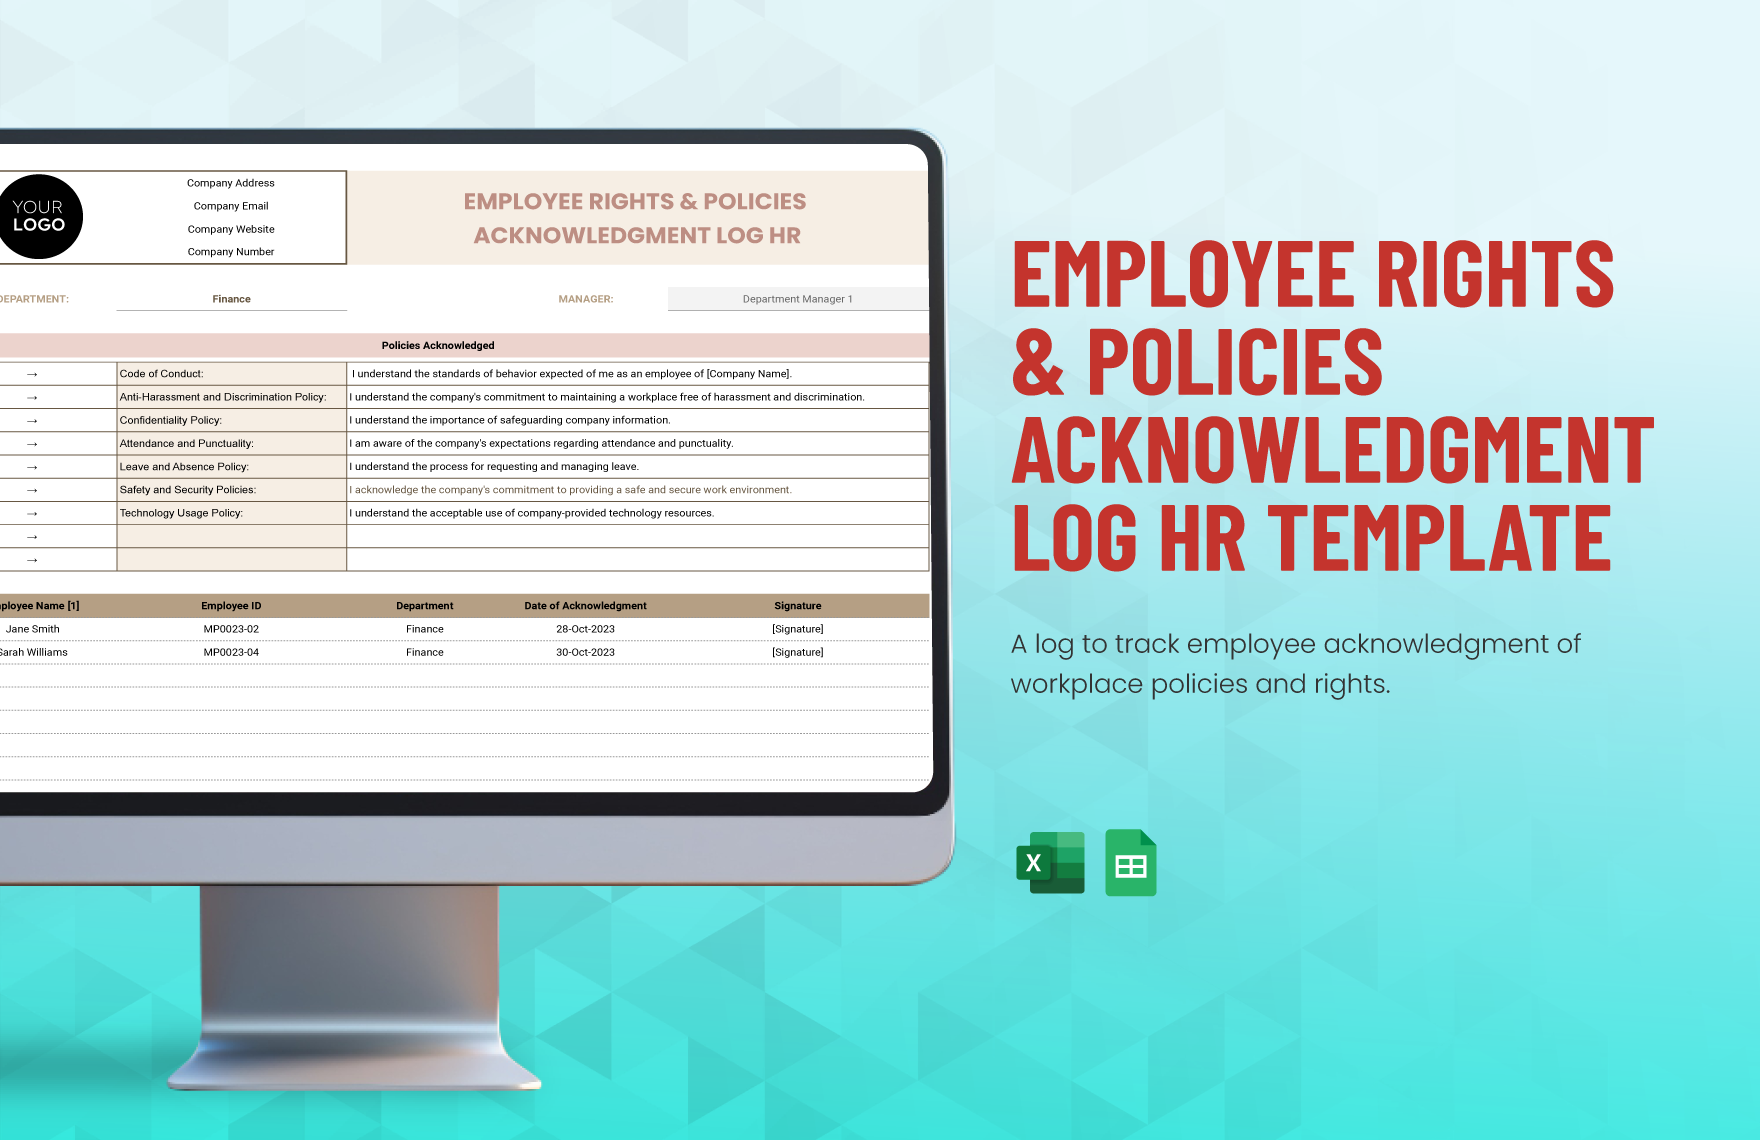 Employee Rights & Policies Acknowledgment Log HR Template